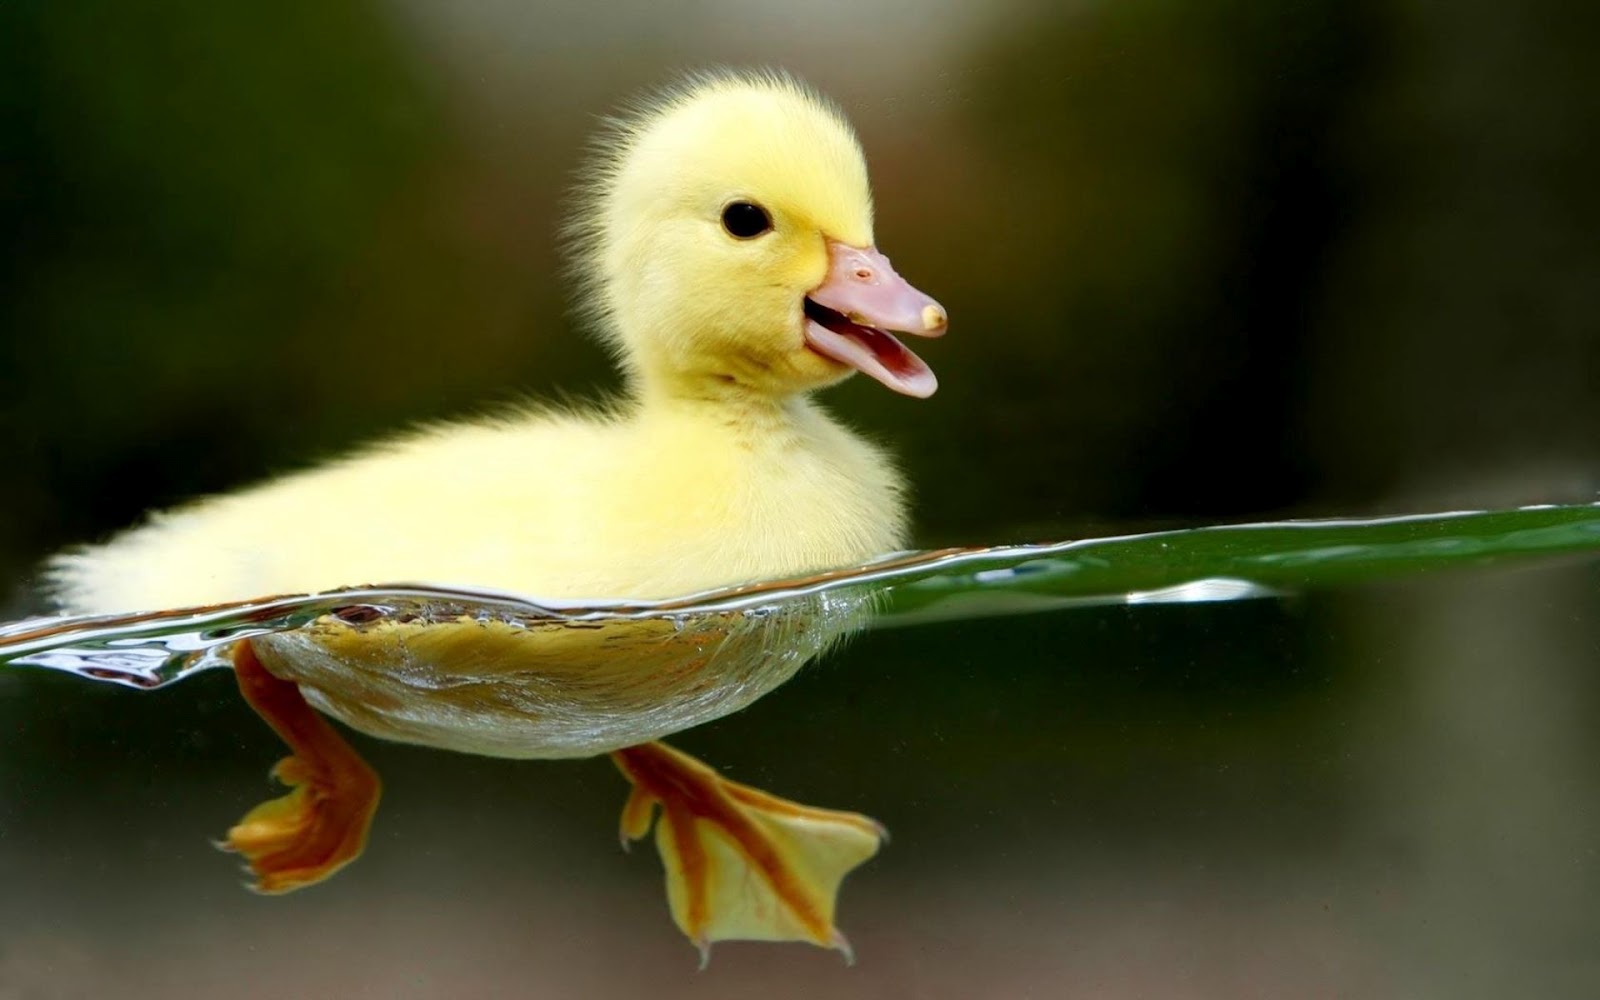 HQ Wallpapers Arena HQ Cutee Small Yellow Duck Wallpaper